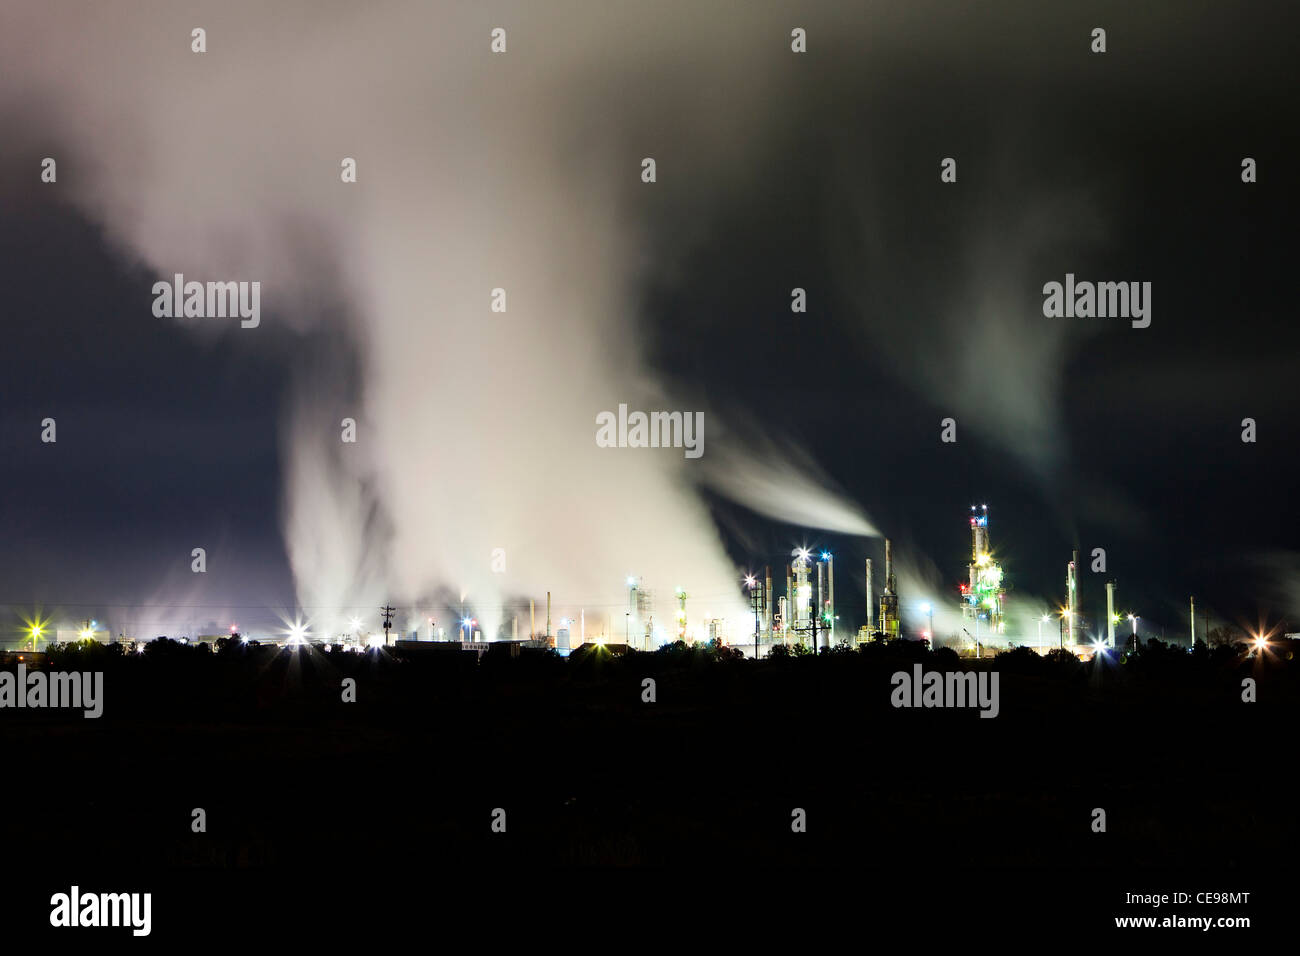 Steam rising from industrial plant Stock Photo